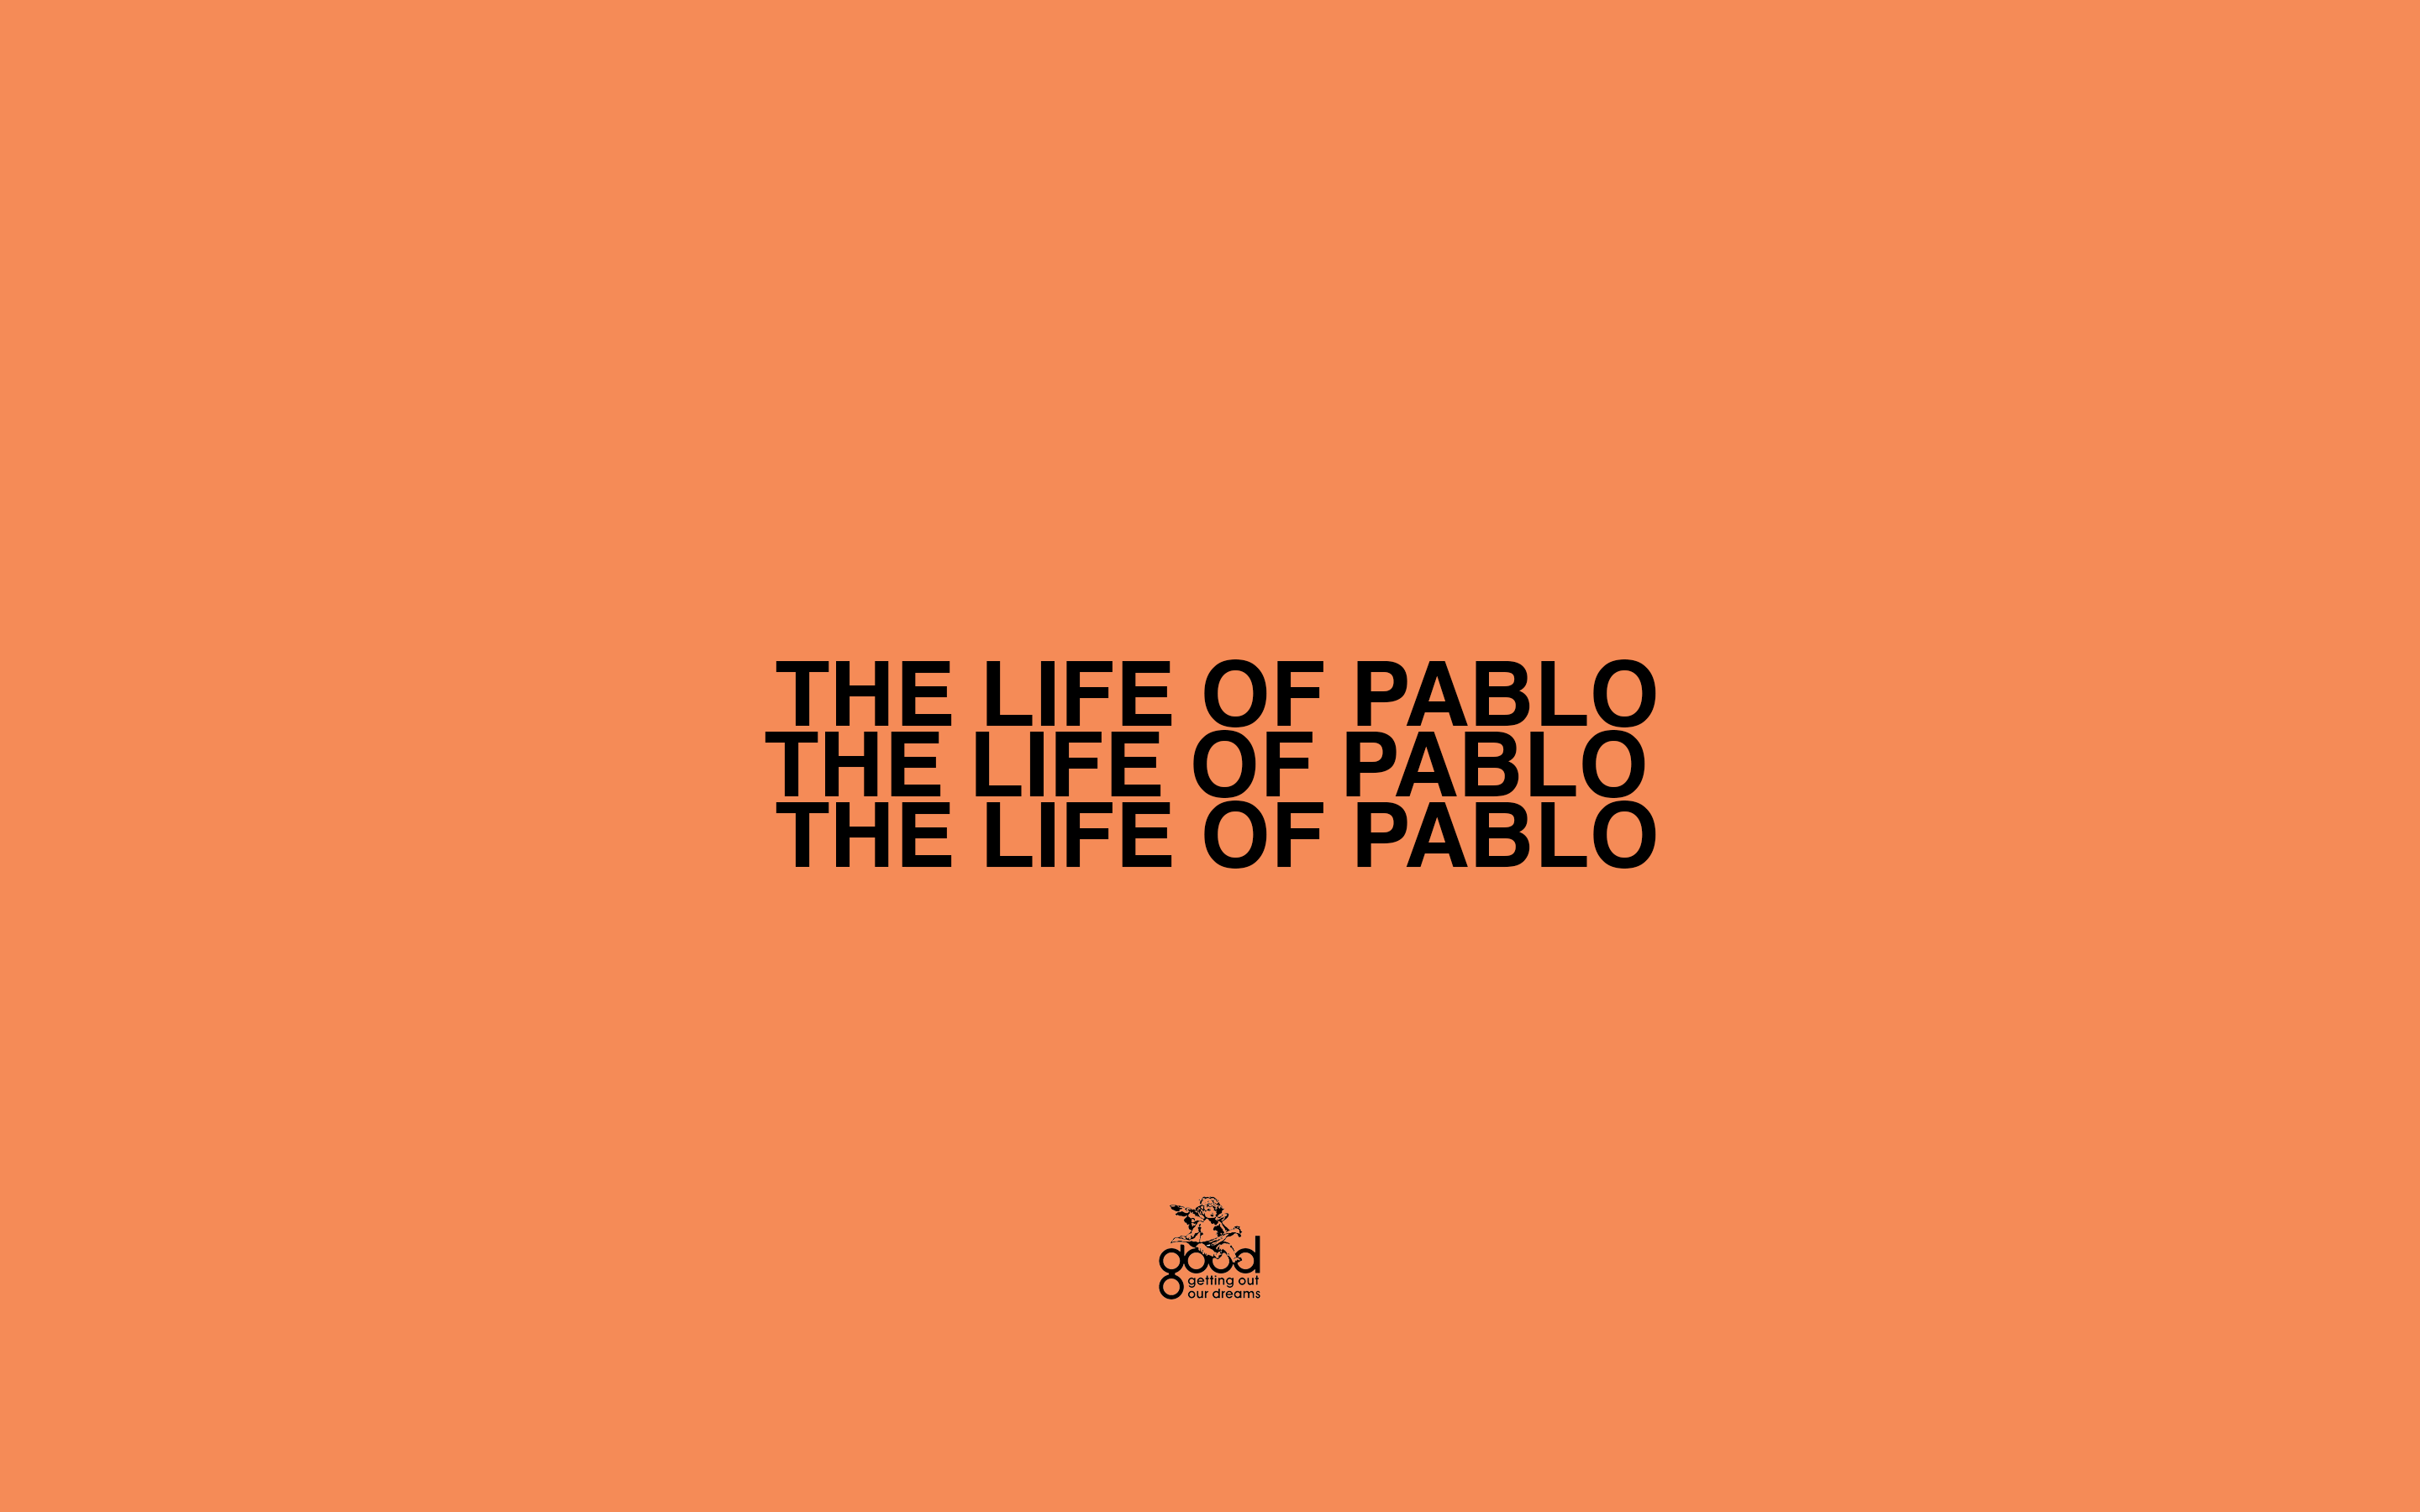 The life of pablo. Kanye West the Life of Pablo. The Life of Pablo обложка. Kanye West the Life of Pablo обложка.